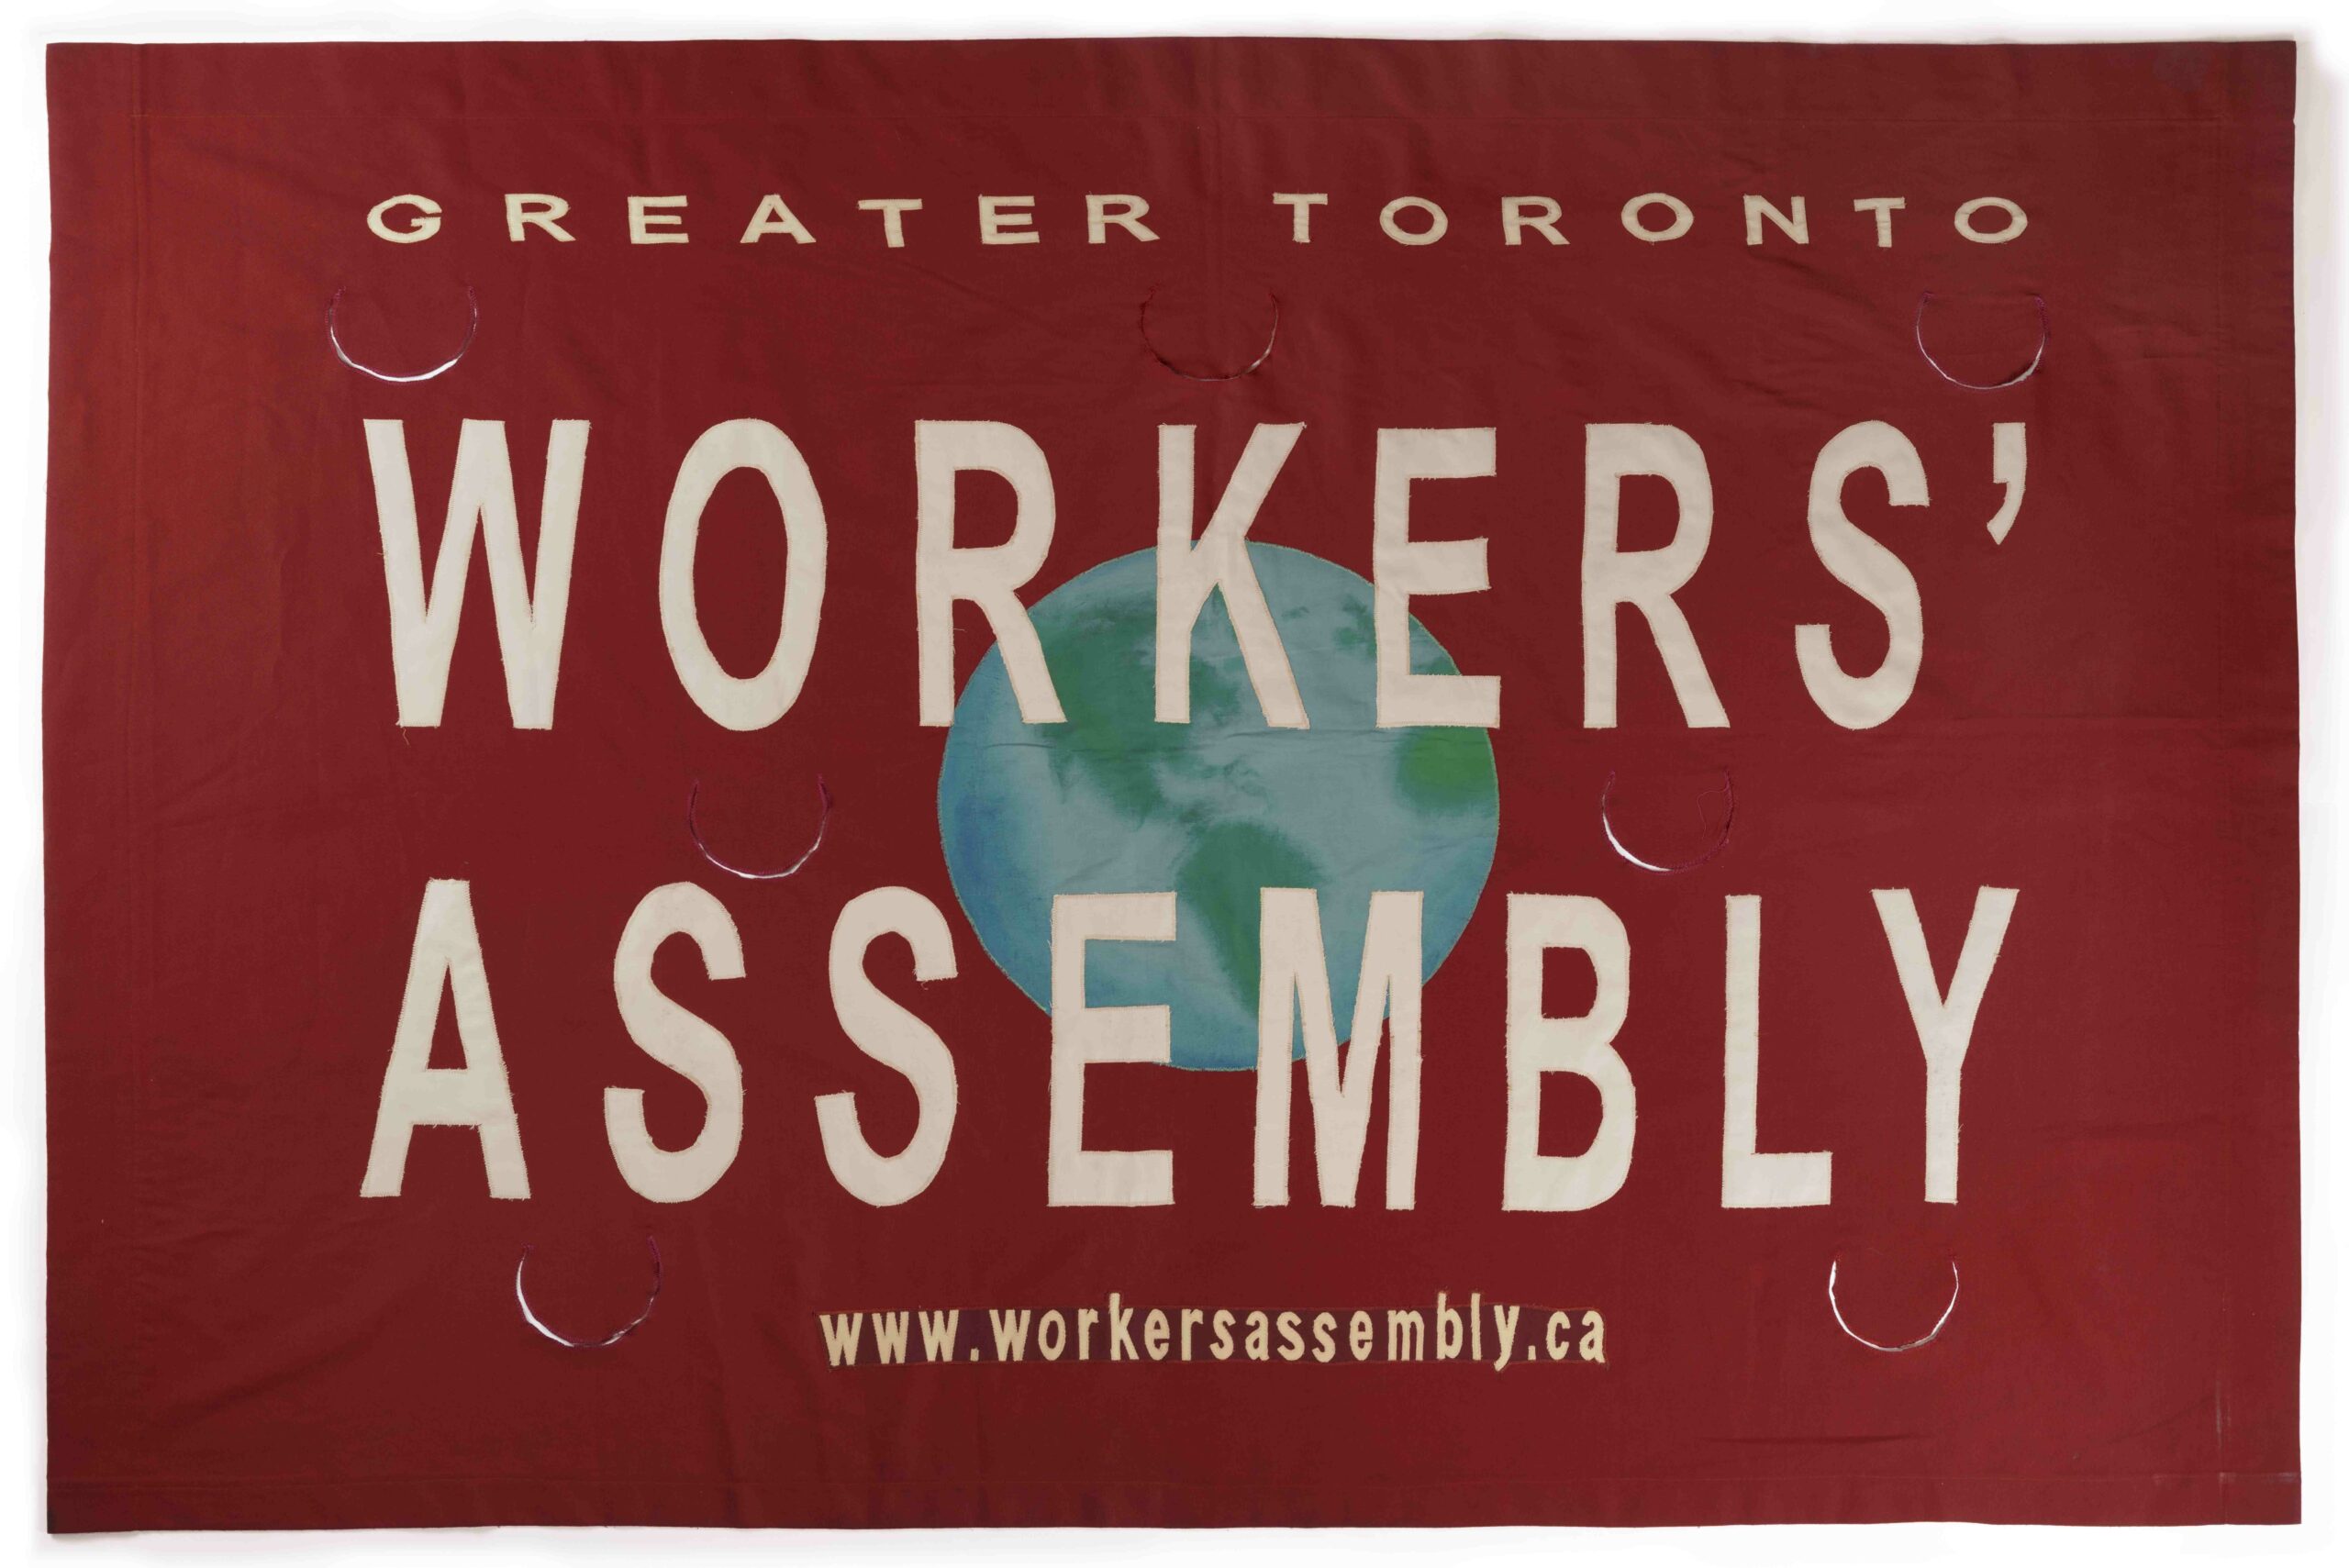 Large red banner with an illustration on the Earth in the middle, text across the width of the banner reads GREATER TORONTO WORKERS' ASSEMBLY, www.workersassembly.ca